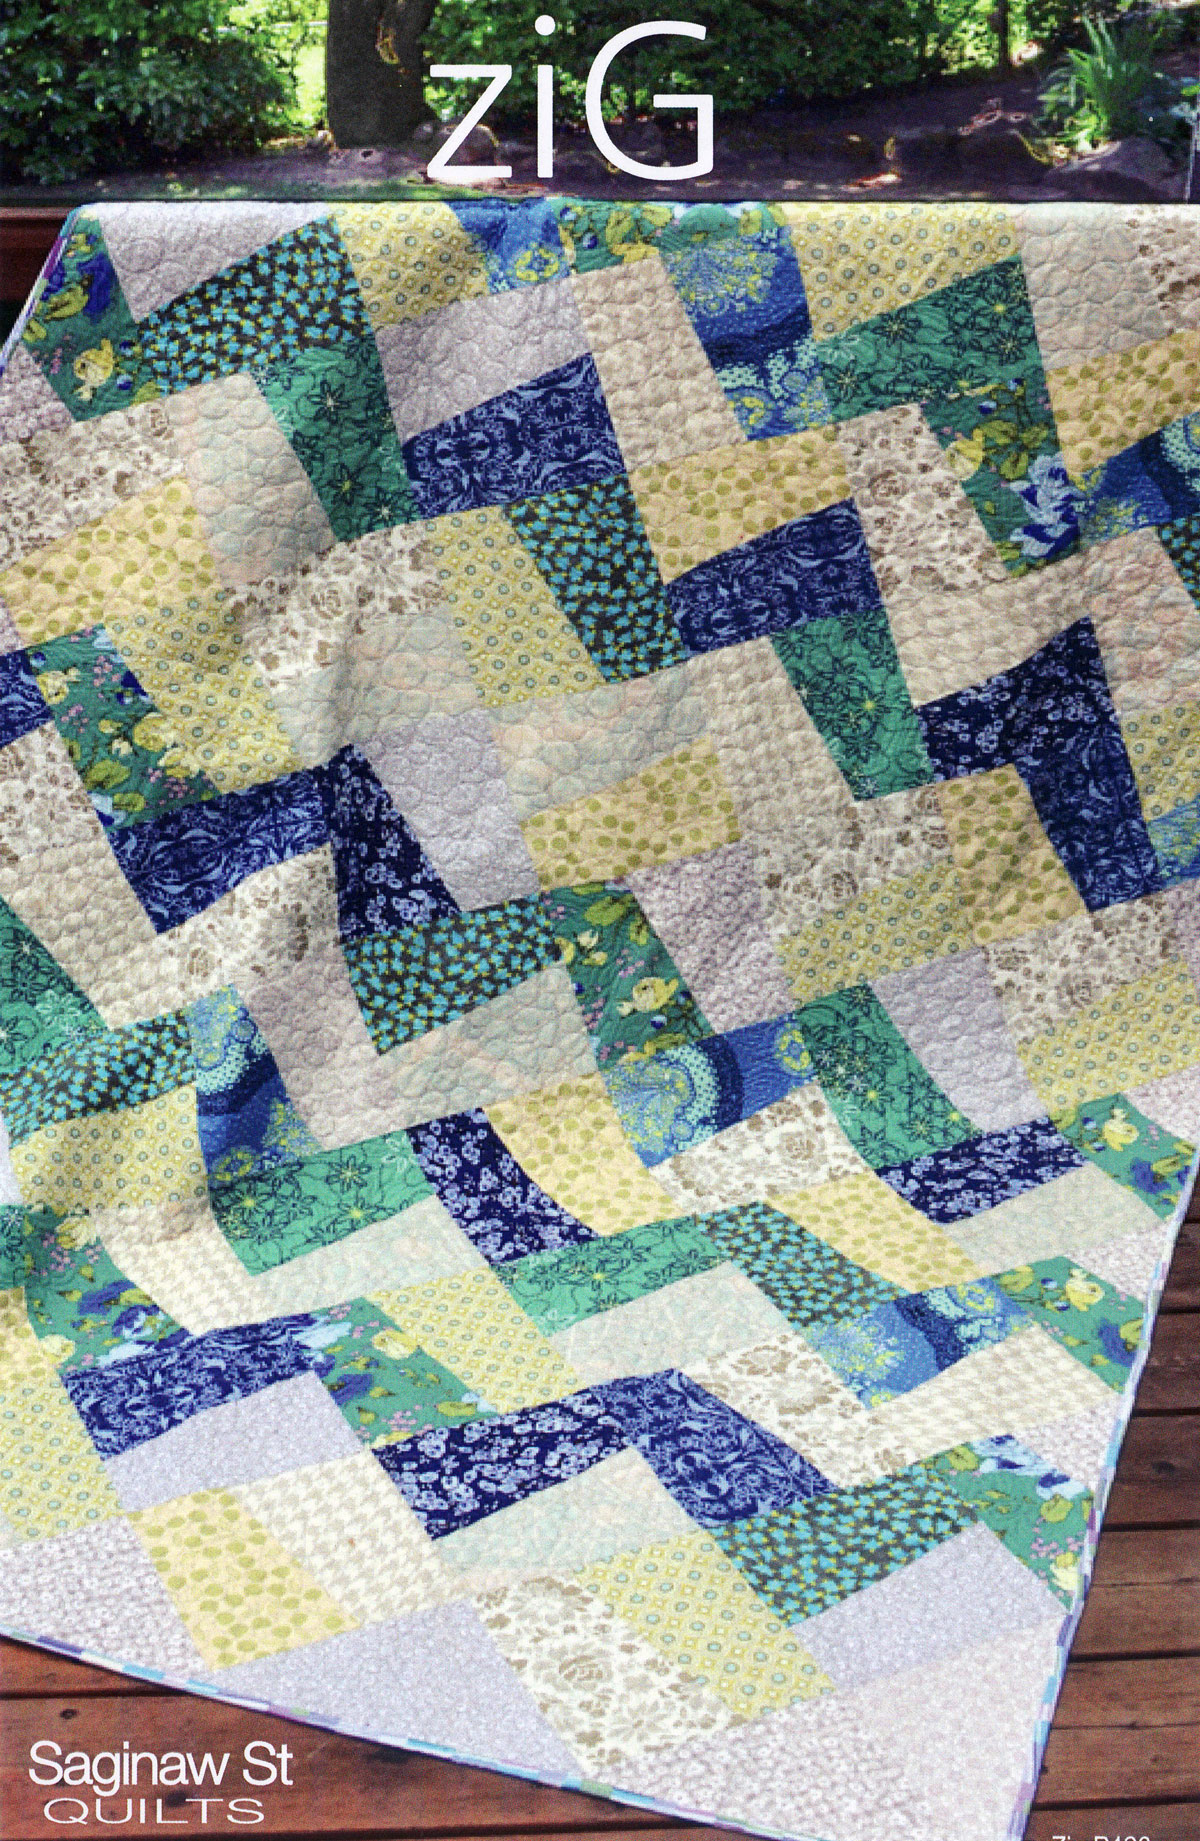 Zig-quilt-sewing-pattern-Saginaw-st-quilts-front